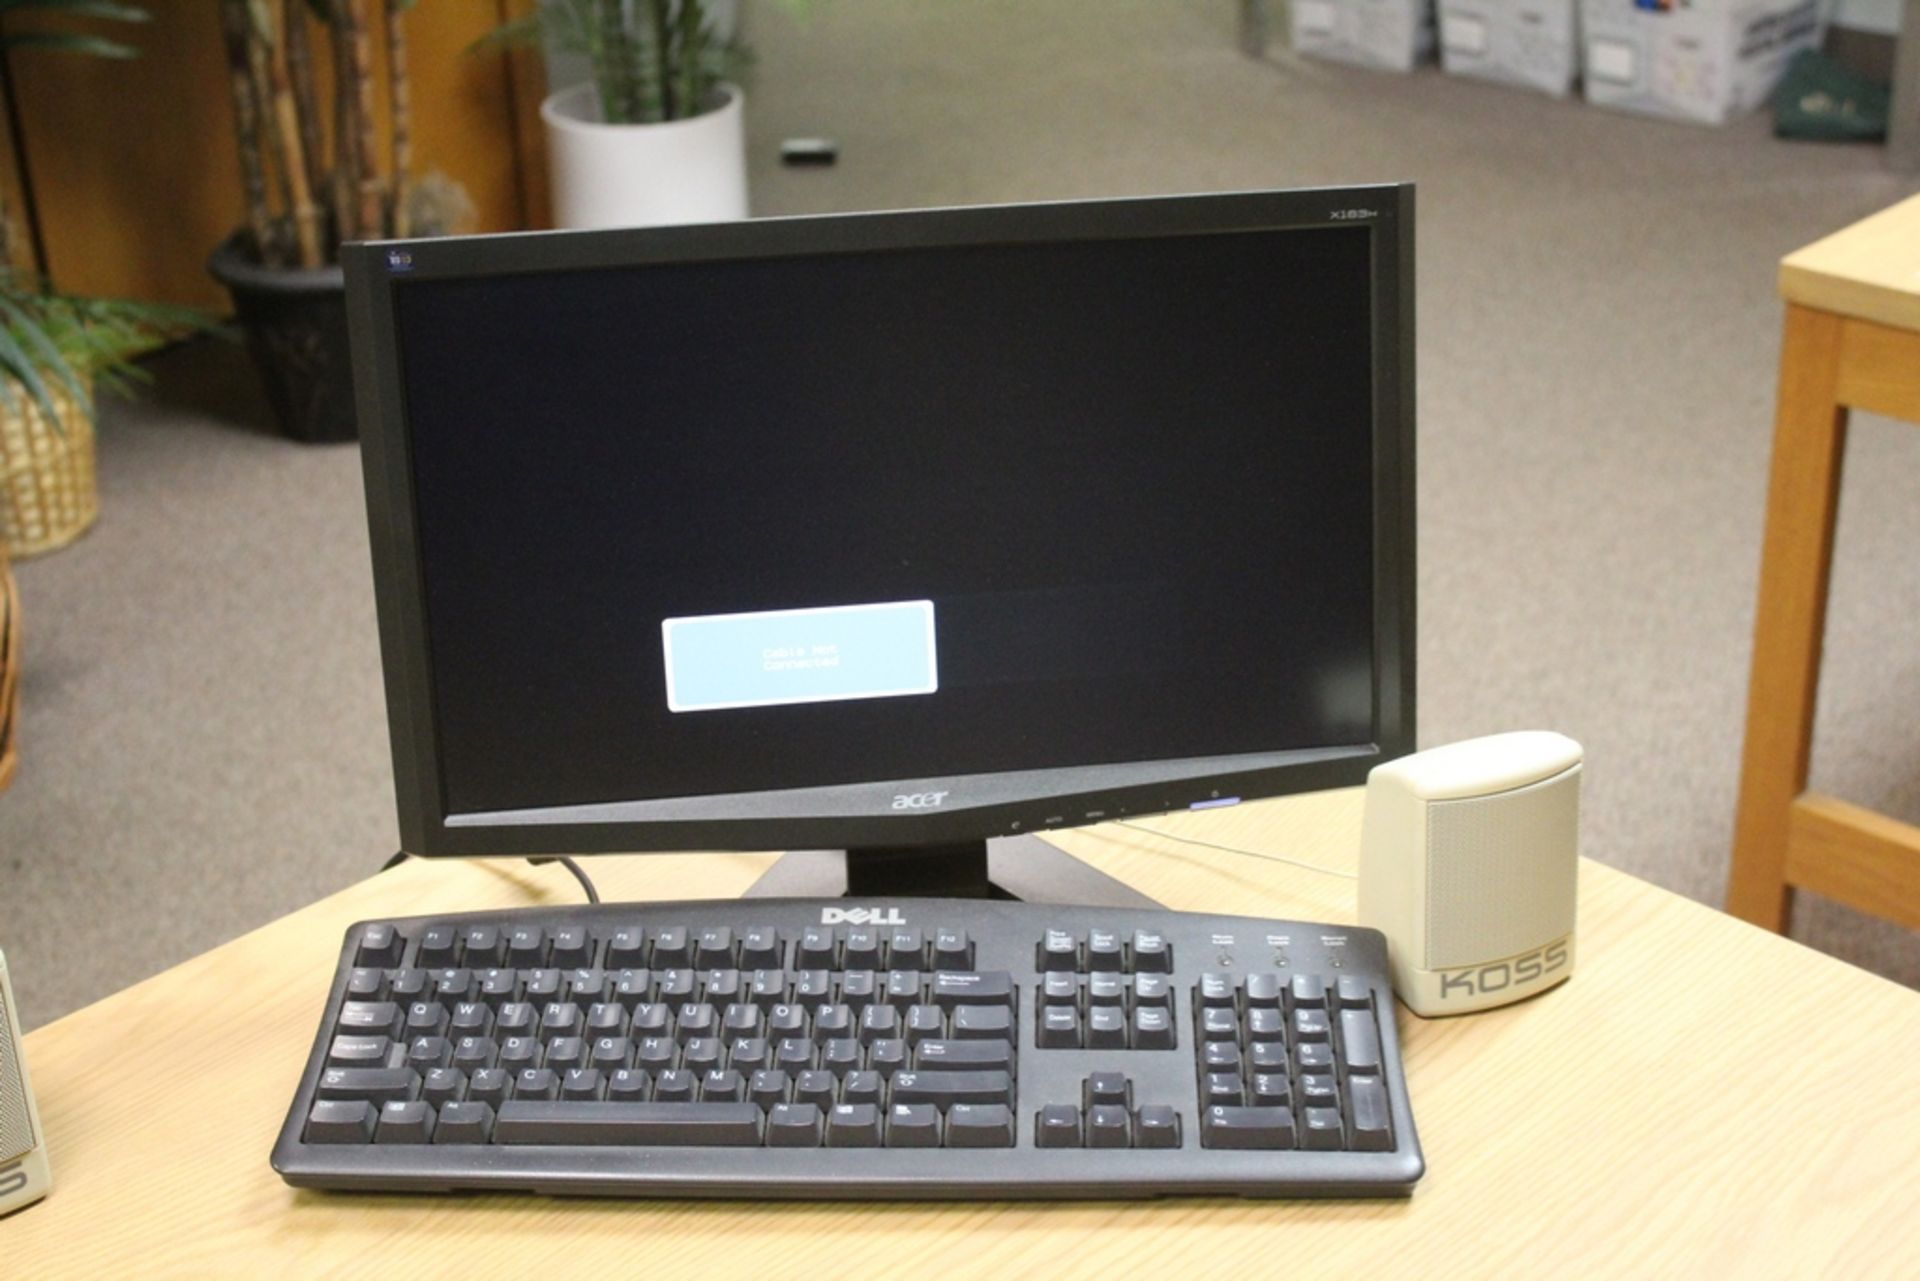 (3) ACER FLATSCREEN MONITORS WITH KEYBOARDS AND MICE - Image 2 of 3